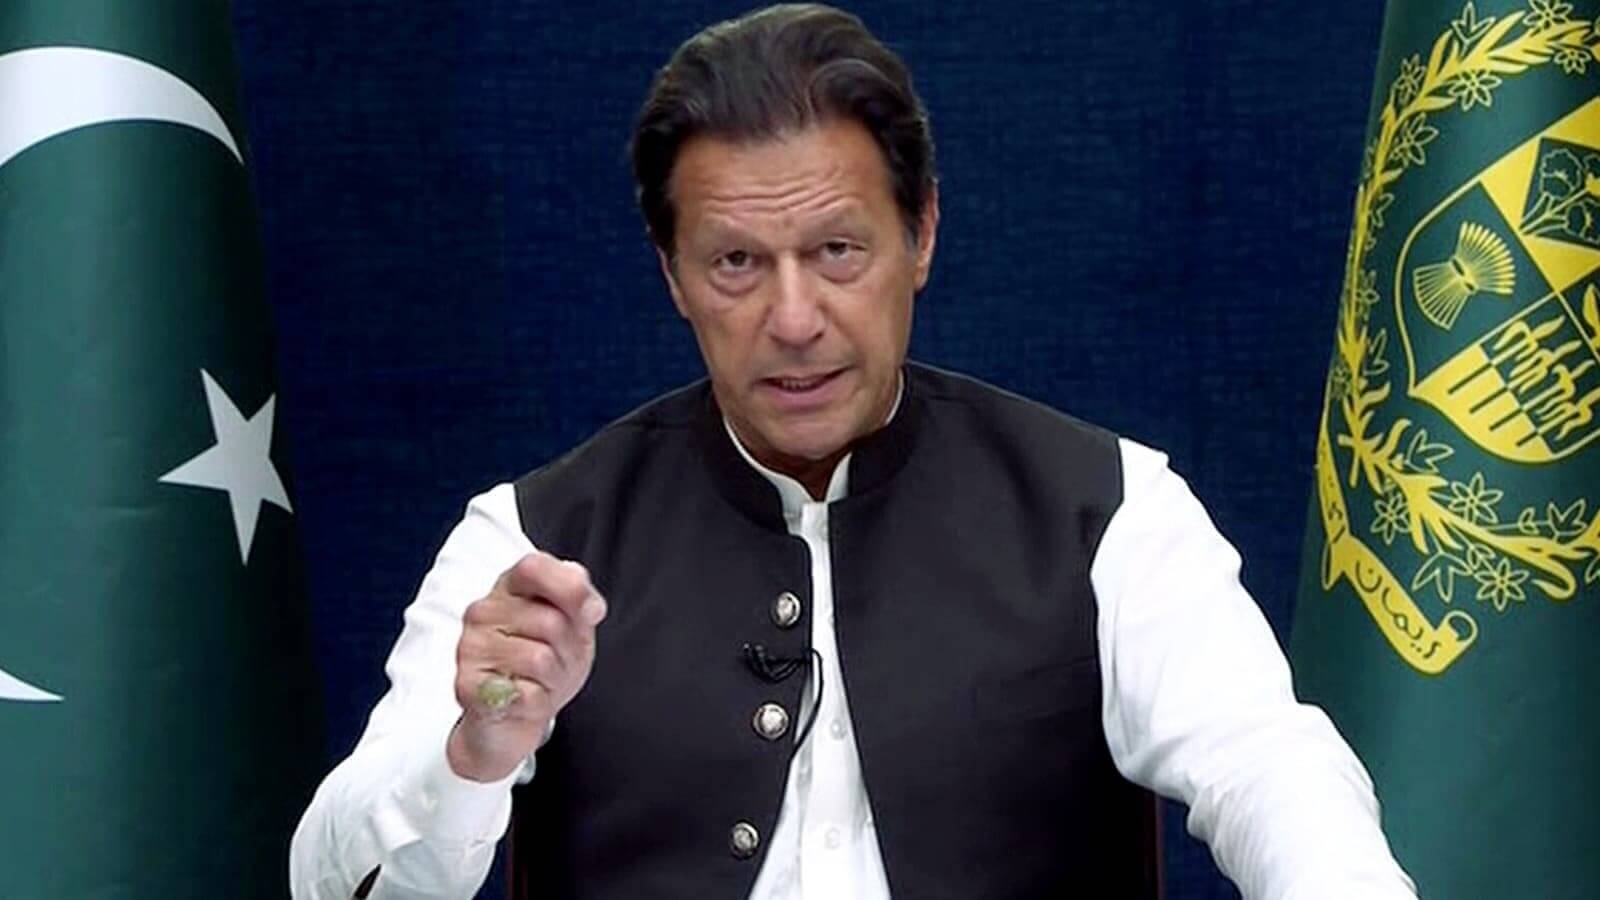 Pakistan PM Imran Khan Refuses to Resign, Says US Behind Foreign Conspiracy to Oust Him